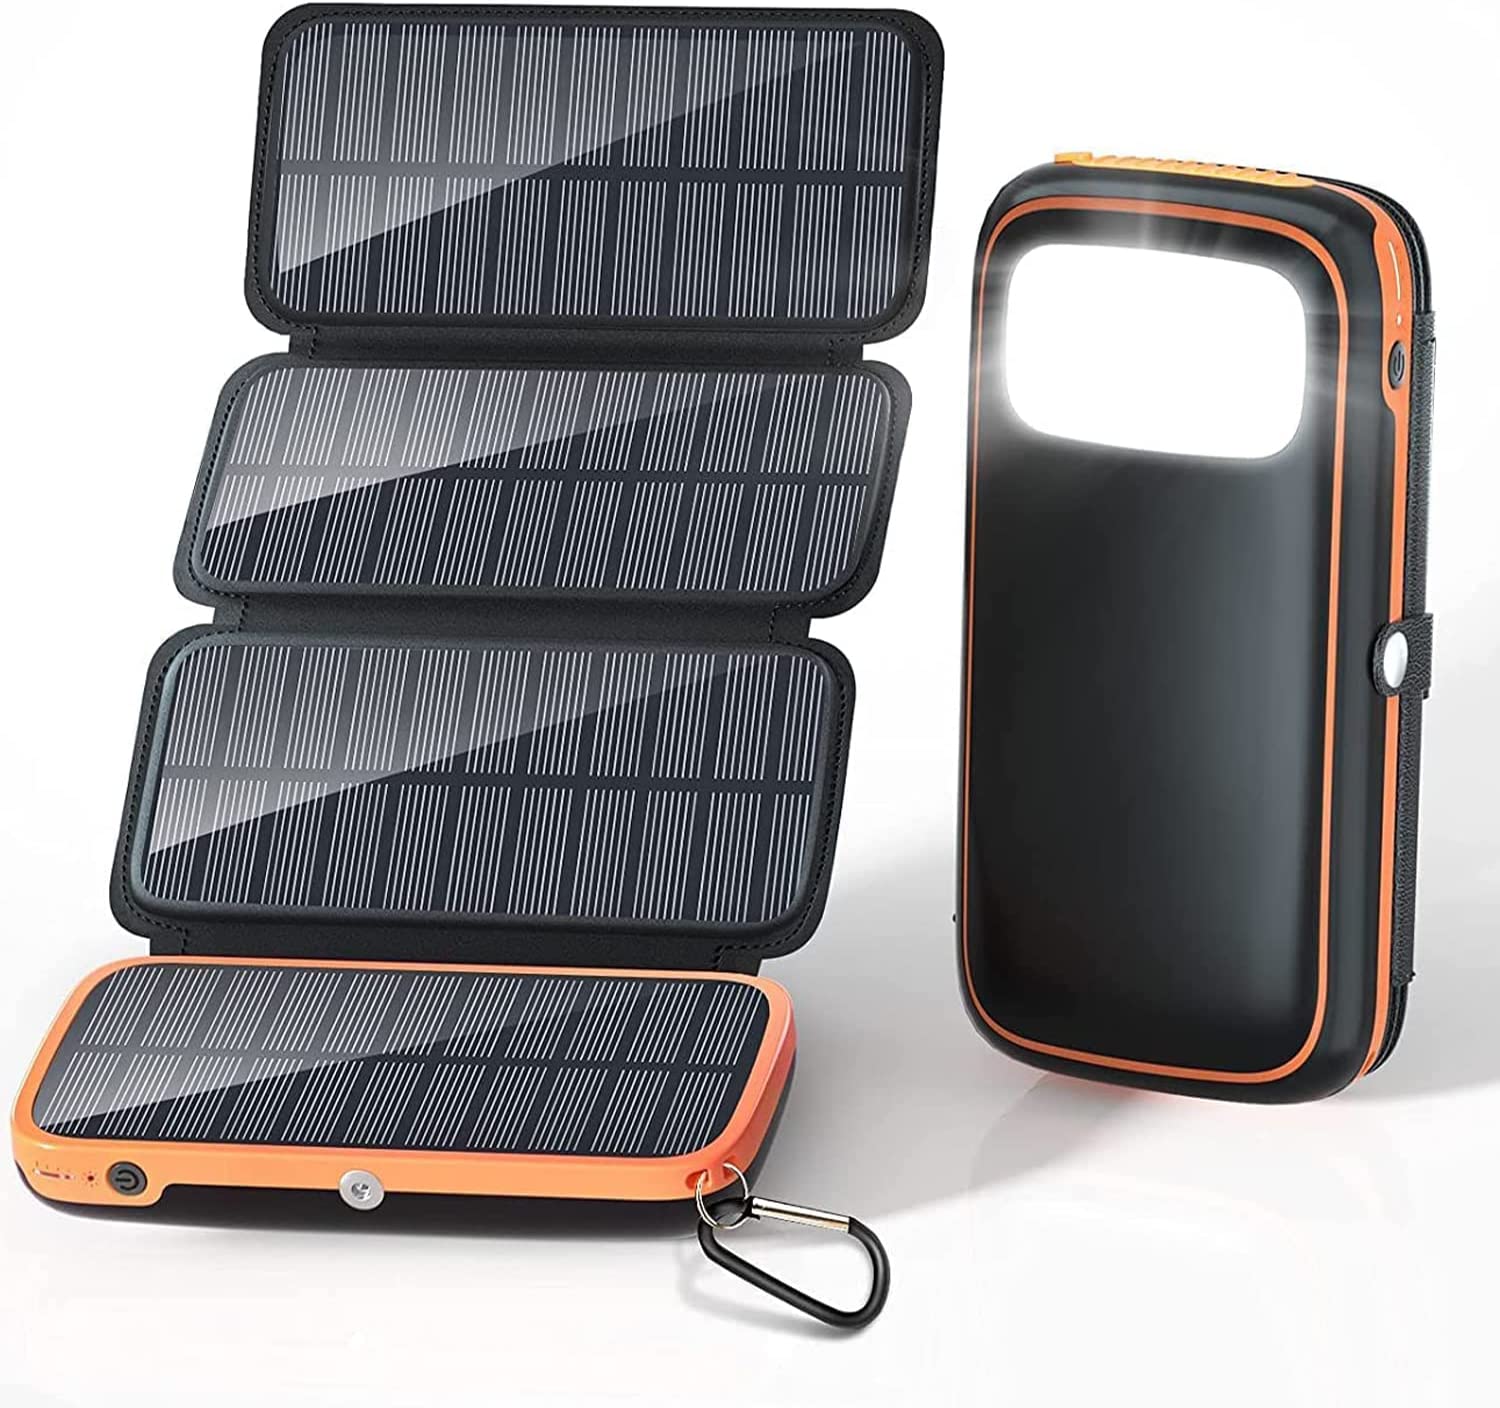 Solar Charger Power Bank 27000mAh with 4 Solar Panels – Hiluckey